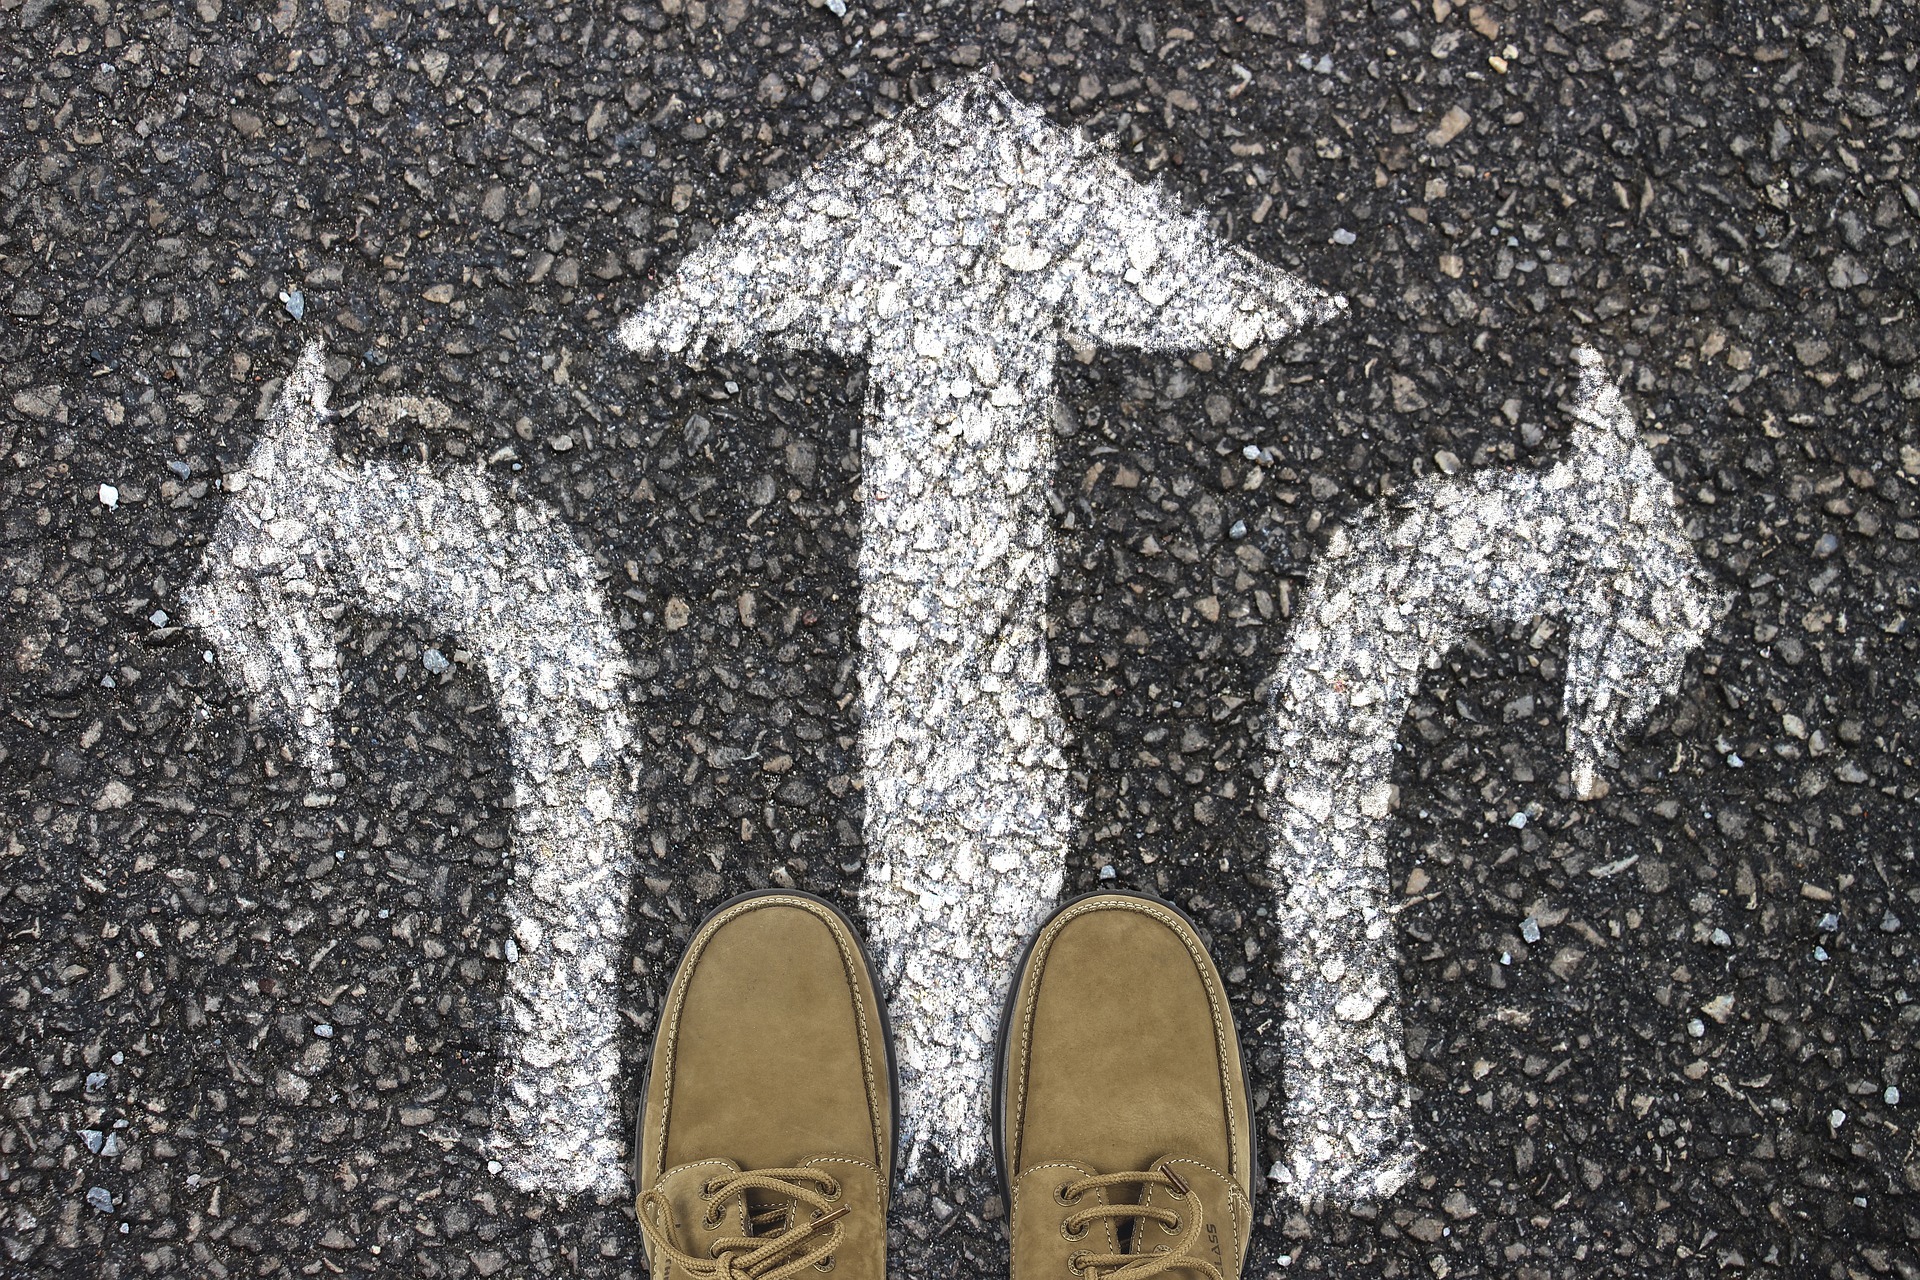 Arrows on the road illustrating difficult decision